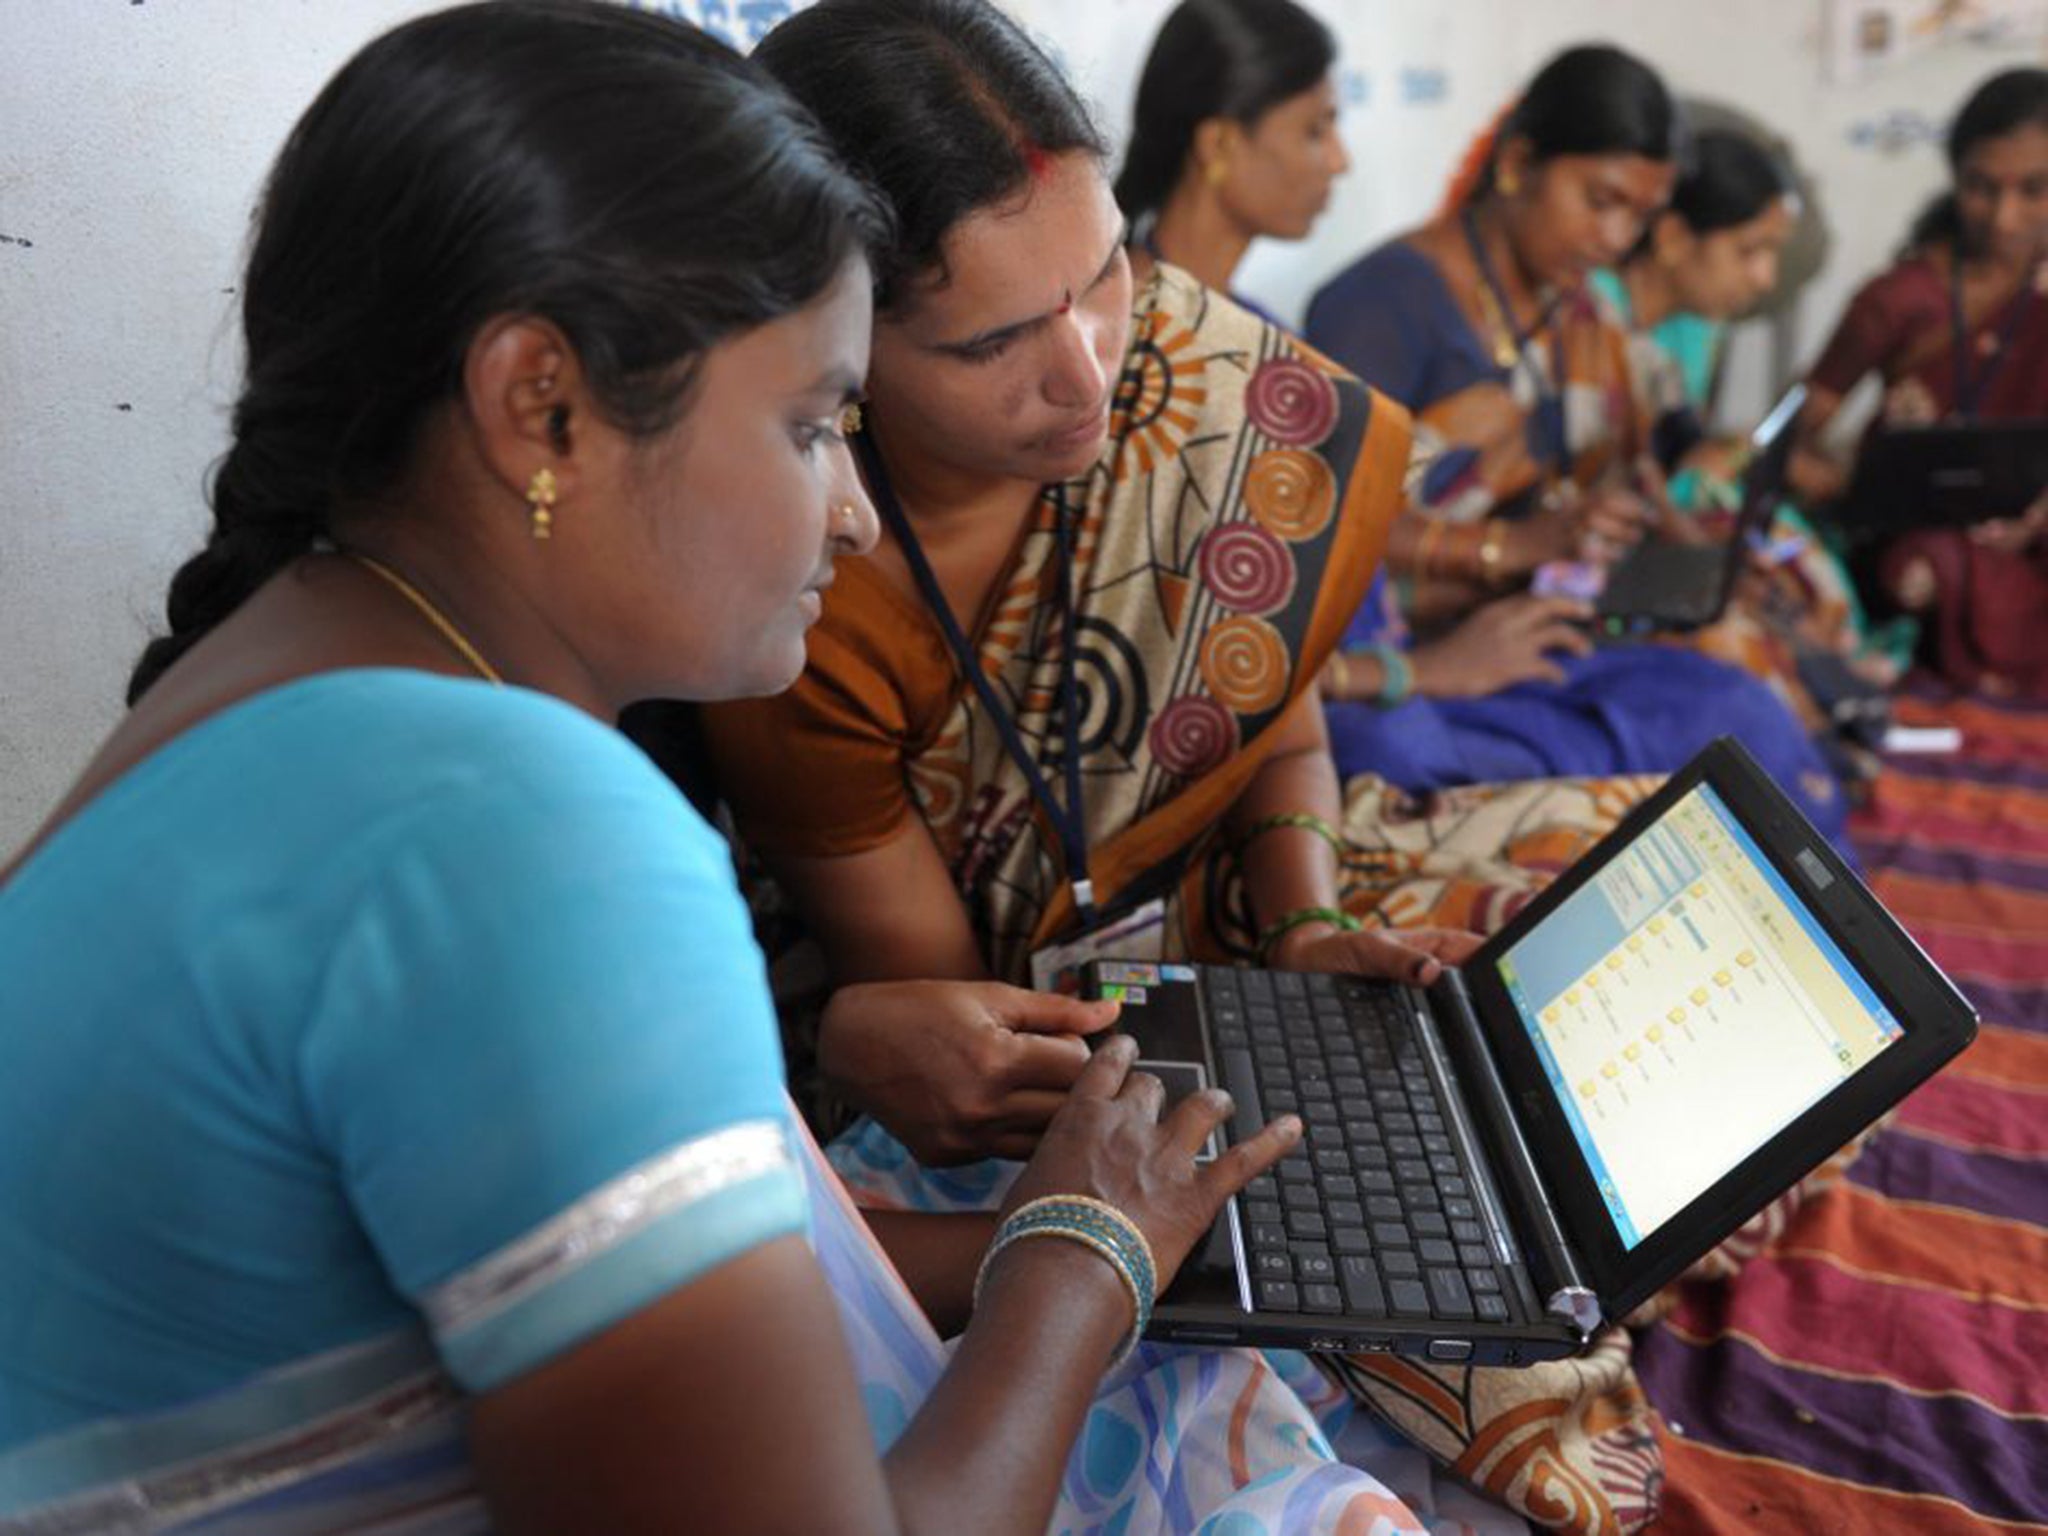 Going online in a village in India. The OneWeb project has raised $500m from businesses